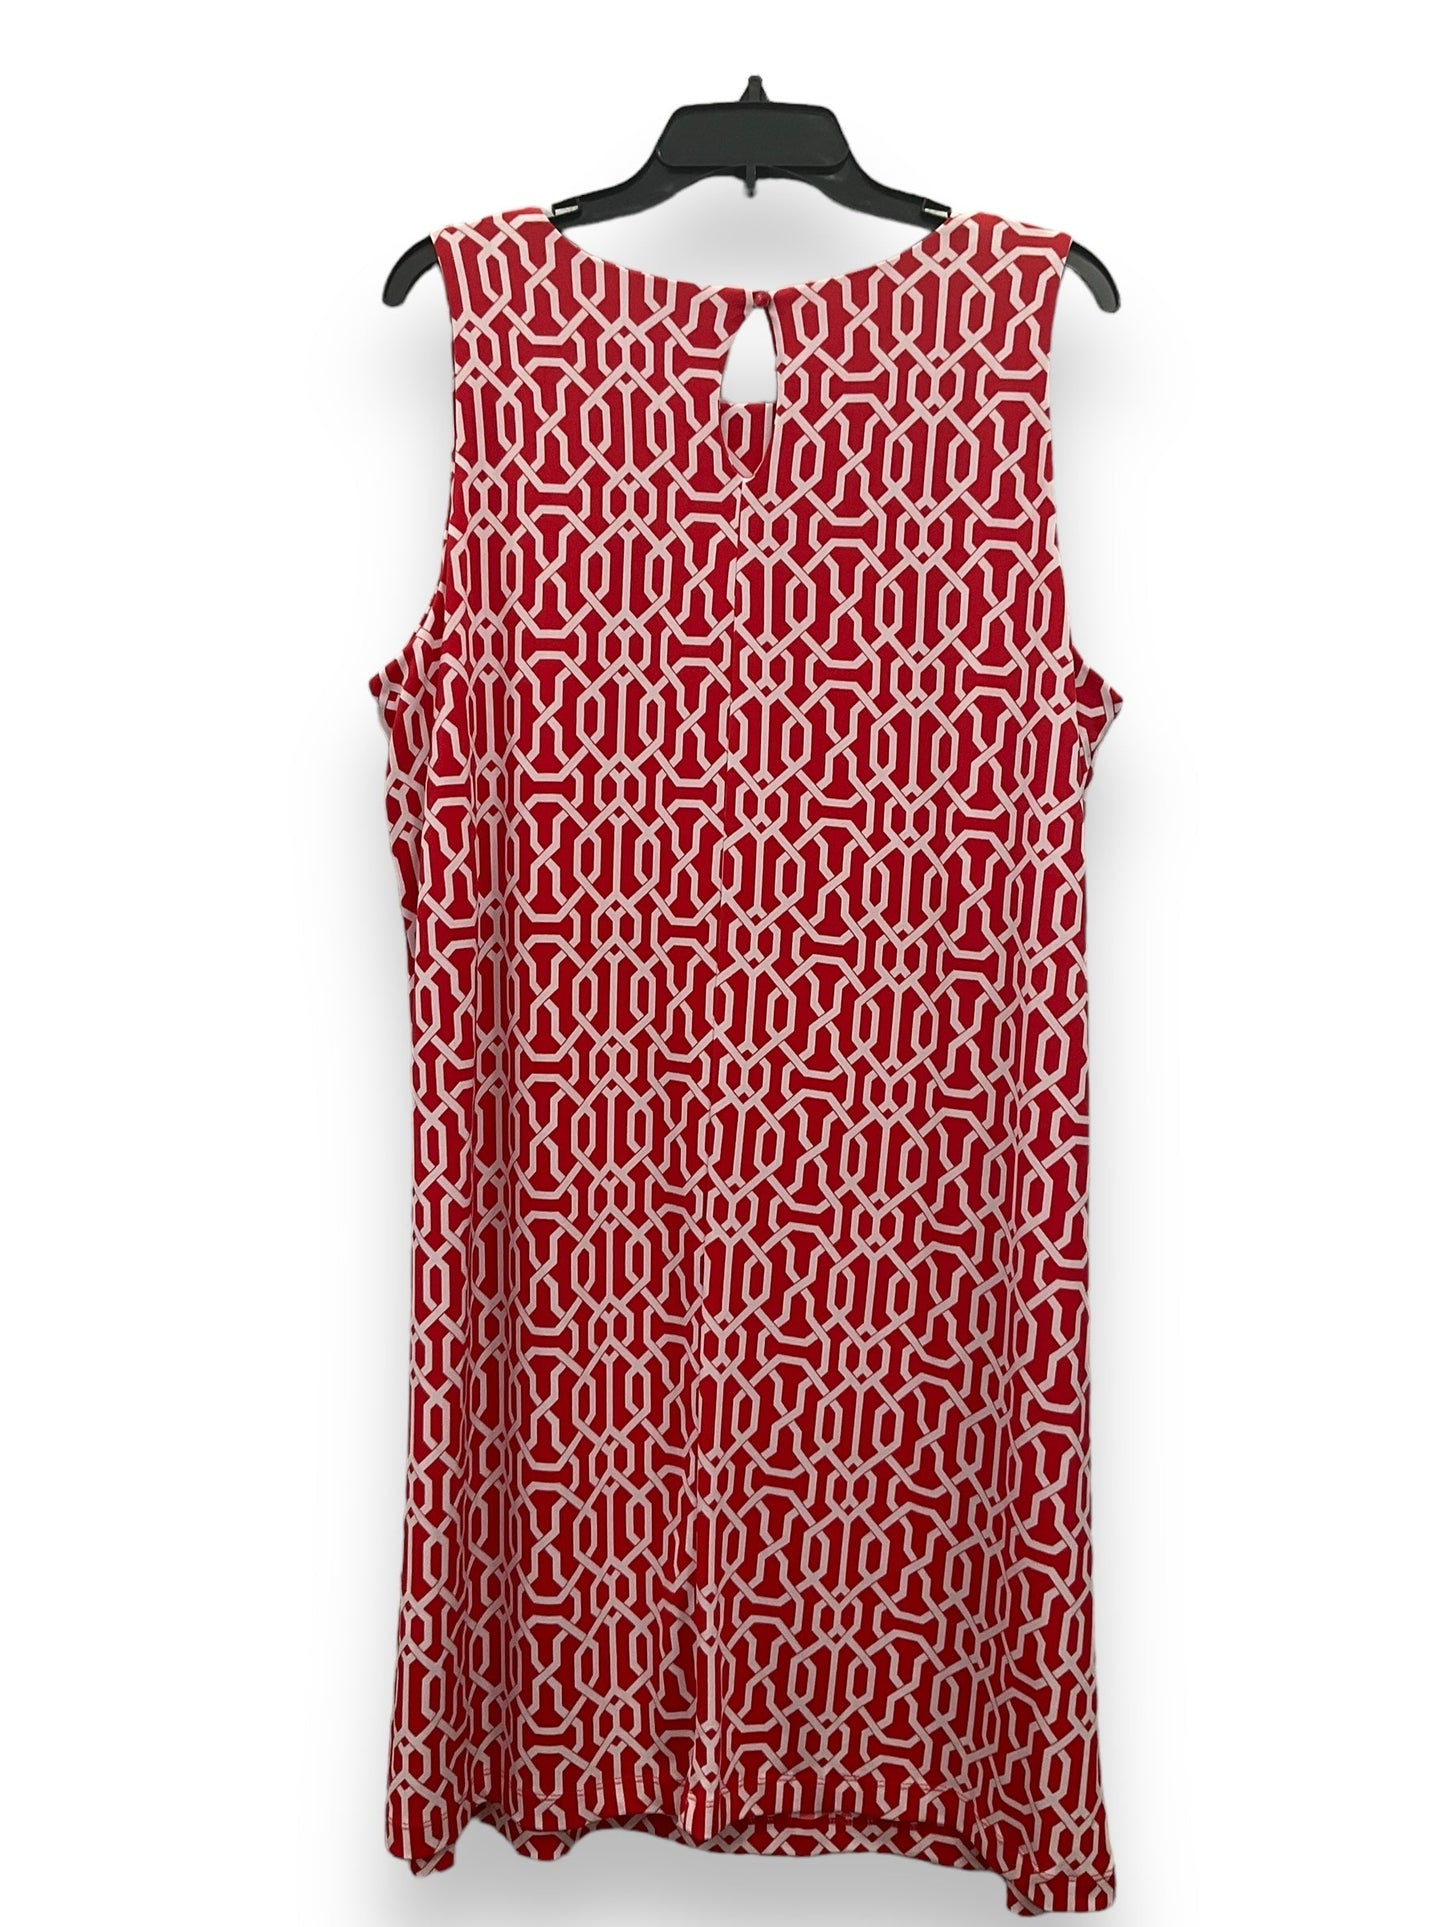 Red & White Dress Casual Short George, Size Xl